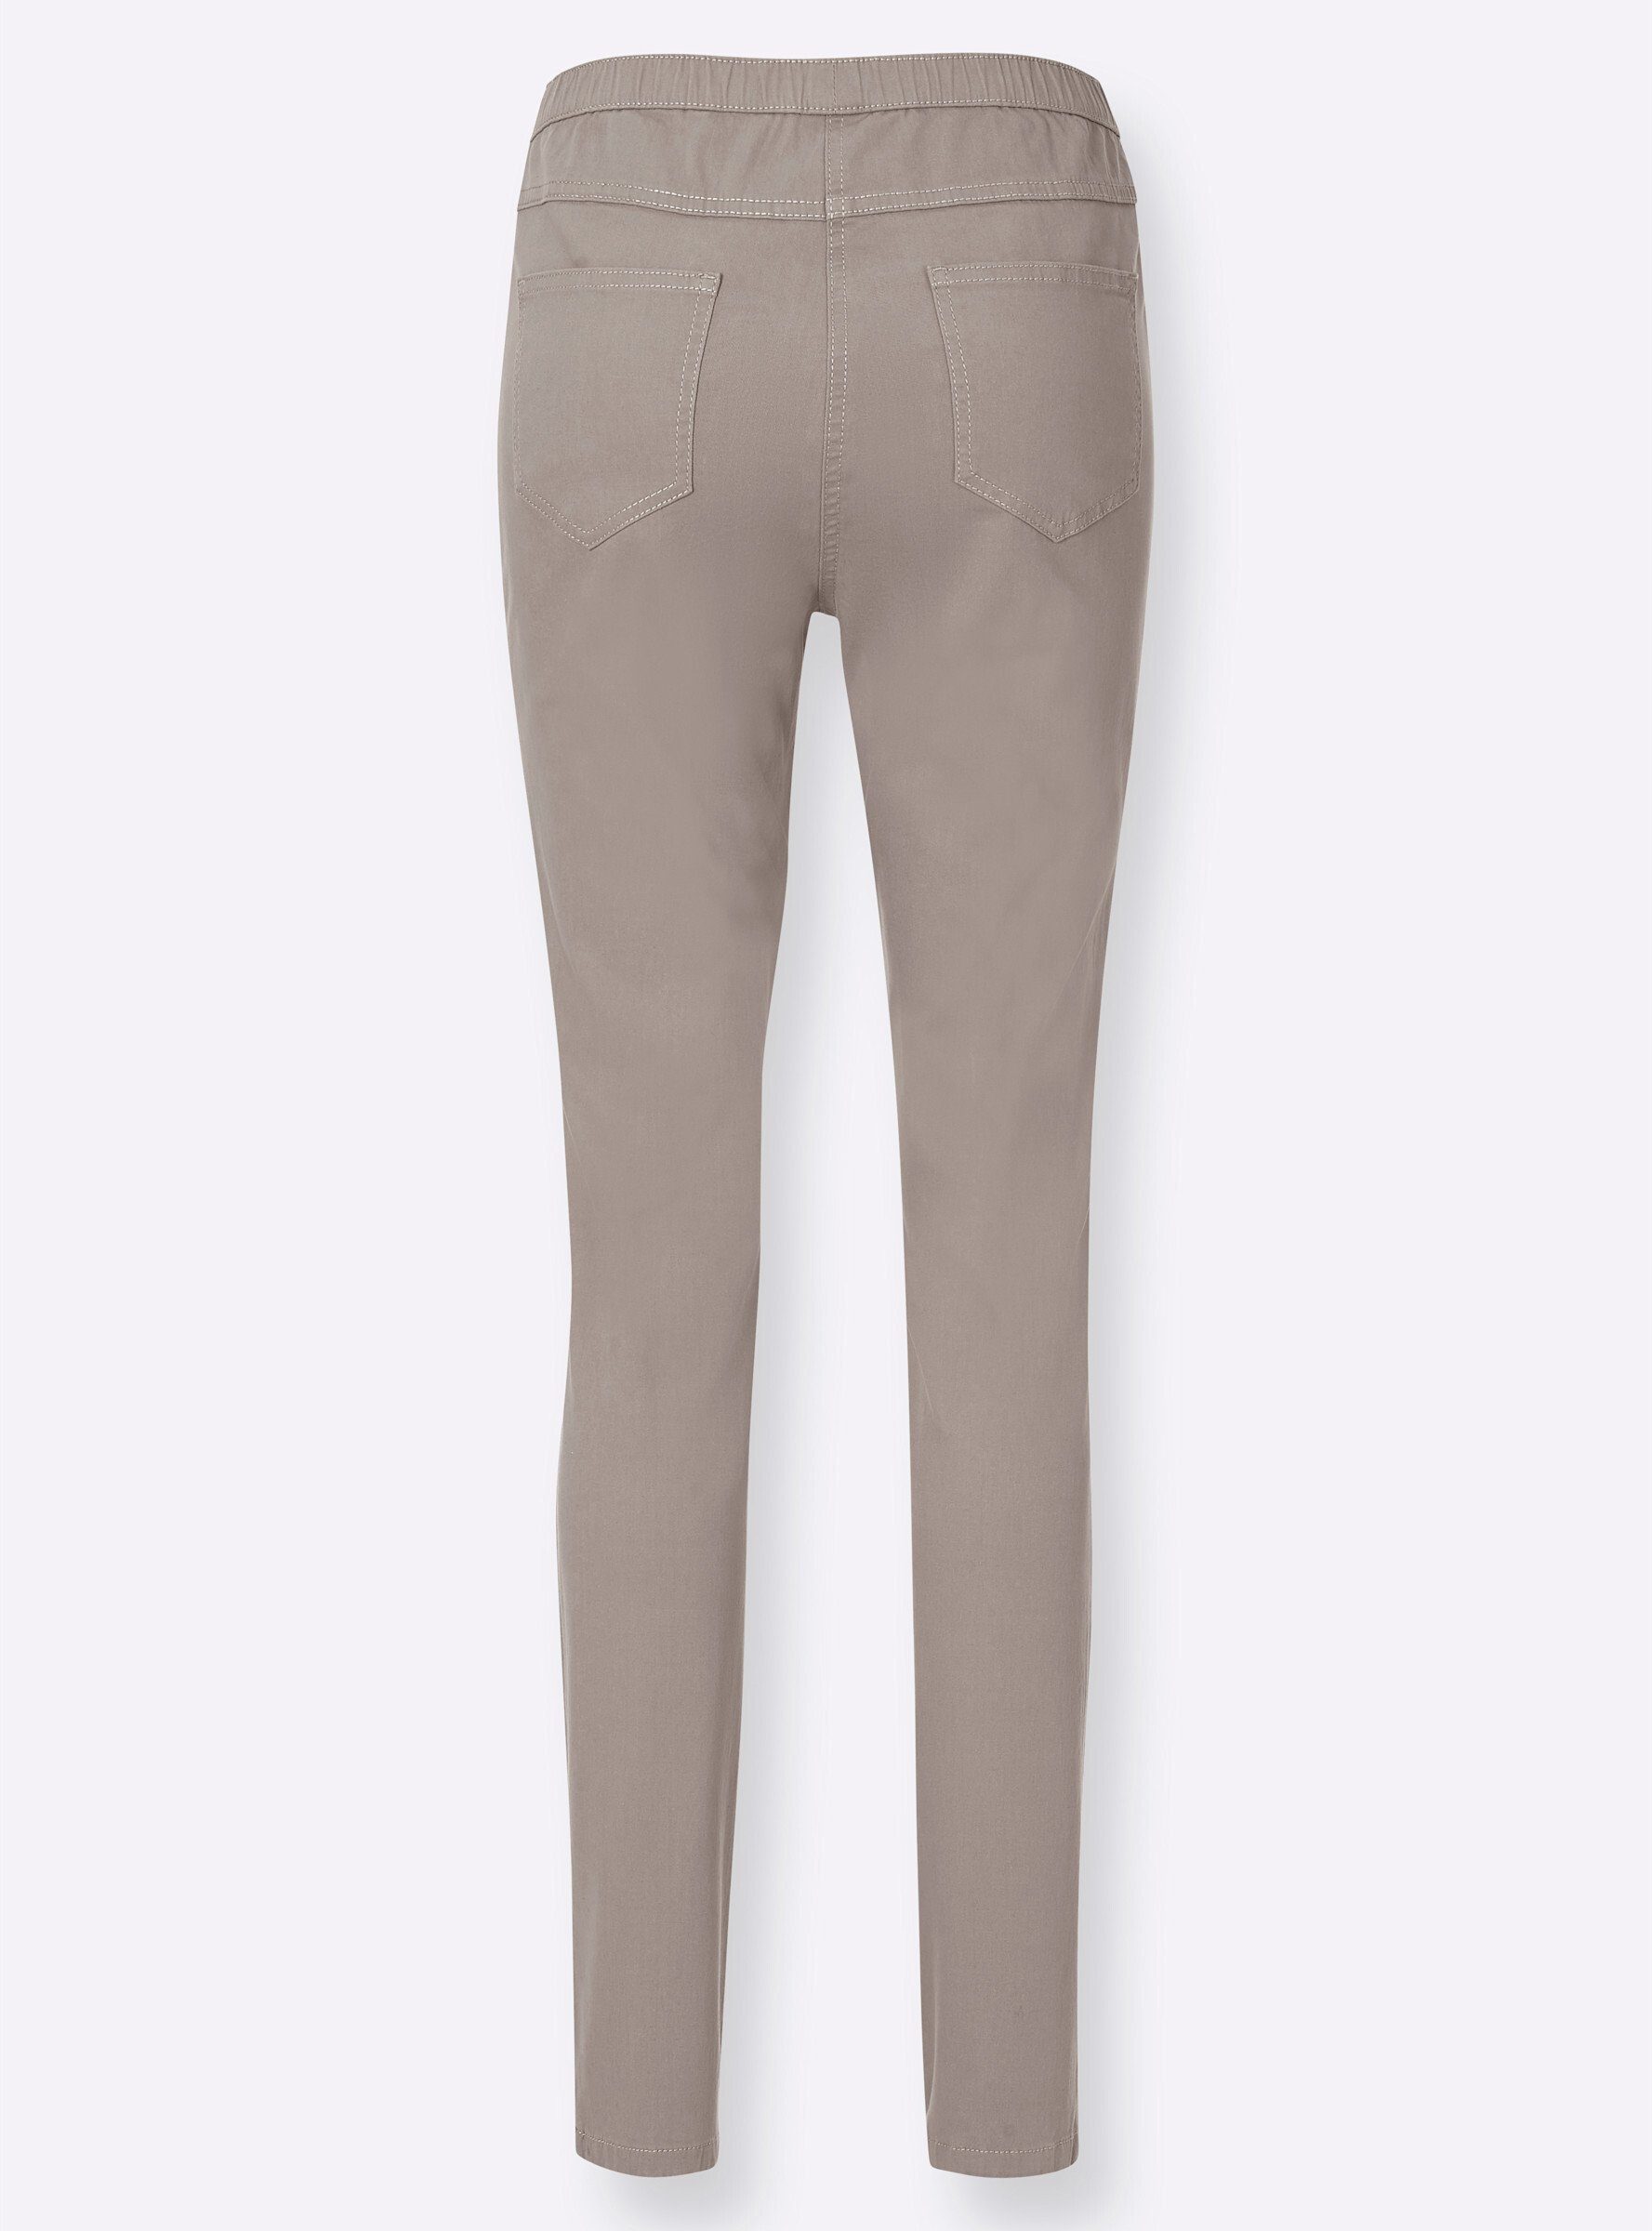 an! taupe Bequeme Jeans Sieh